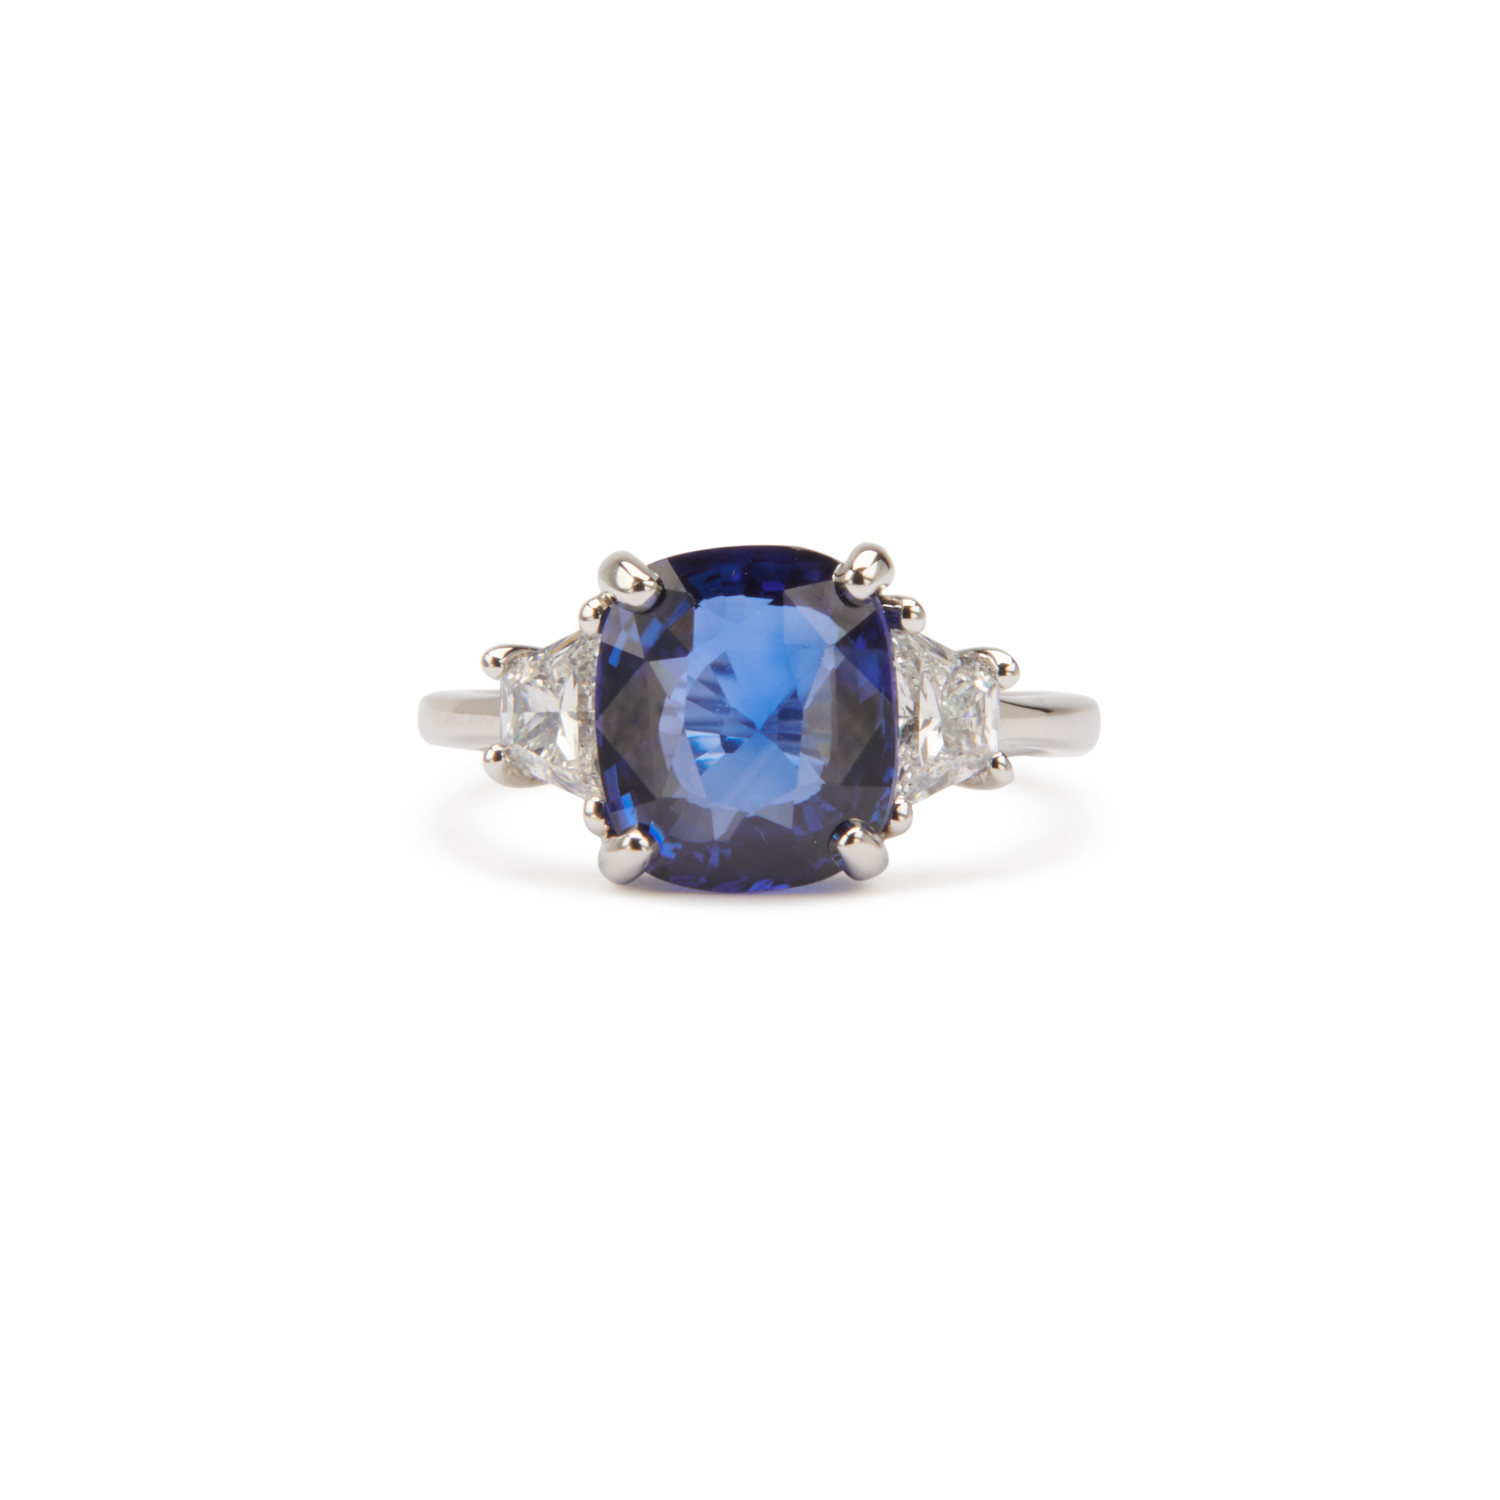 CUSTOM The Victoria Cushion Sapphire Engagement Ring with Trapezoid Side Stones